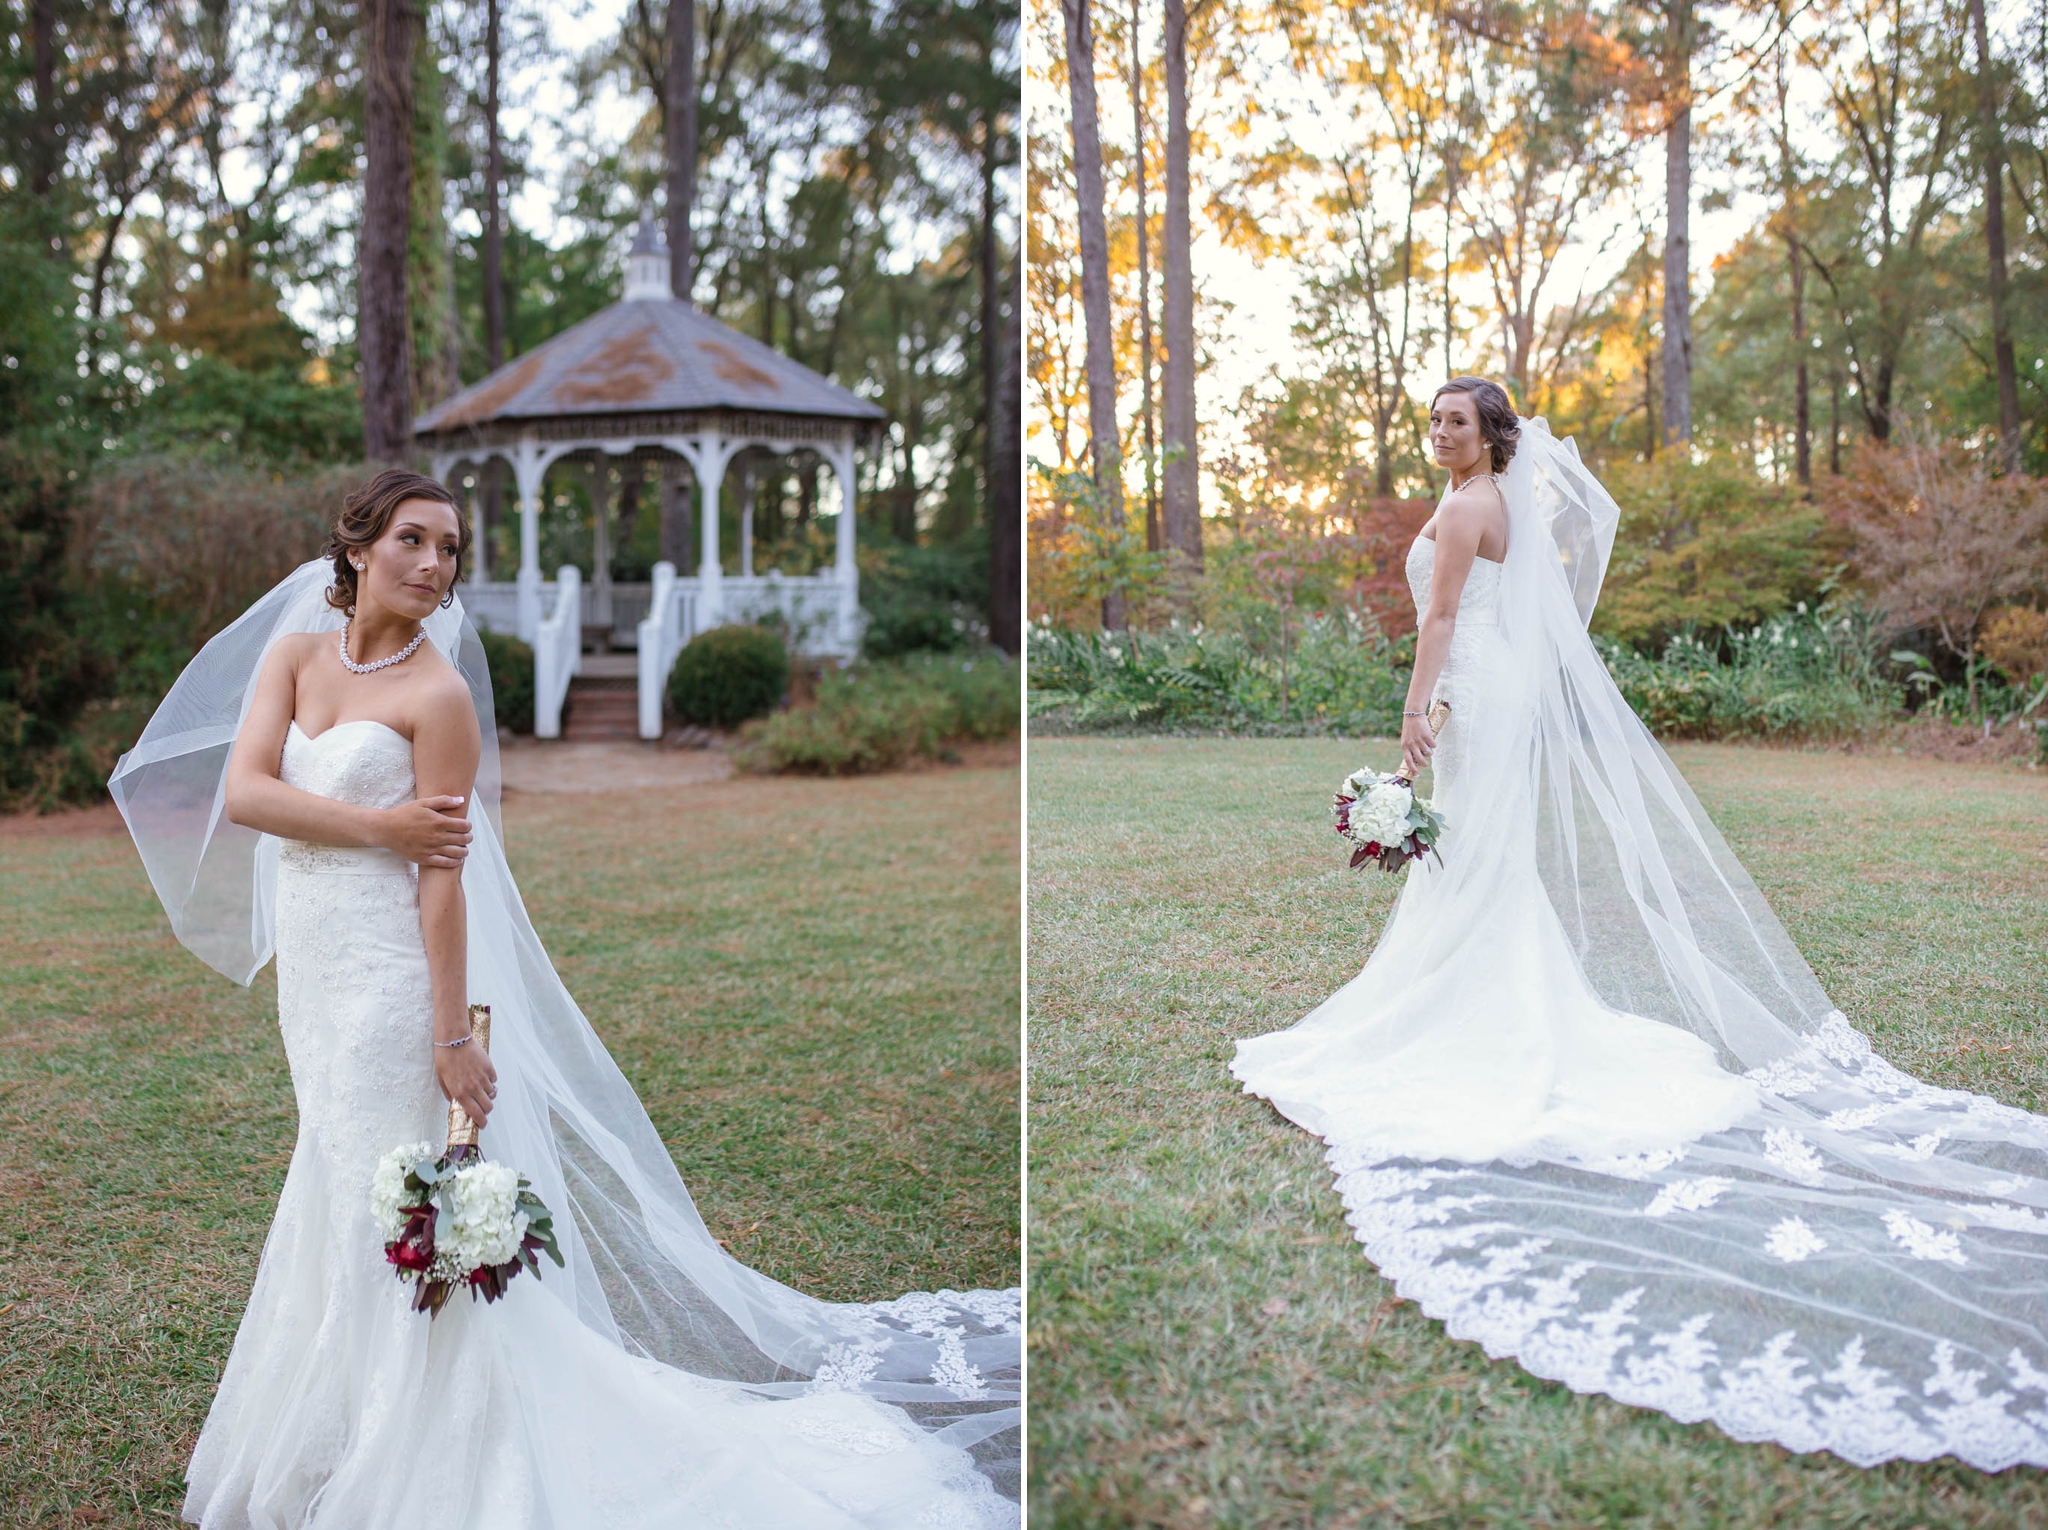 Wedding Photography at the Cape Fear Botanical Garden in Fayetteville North Carolina